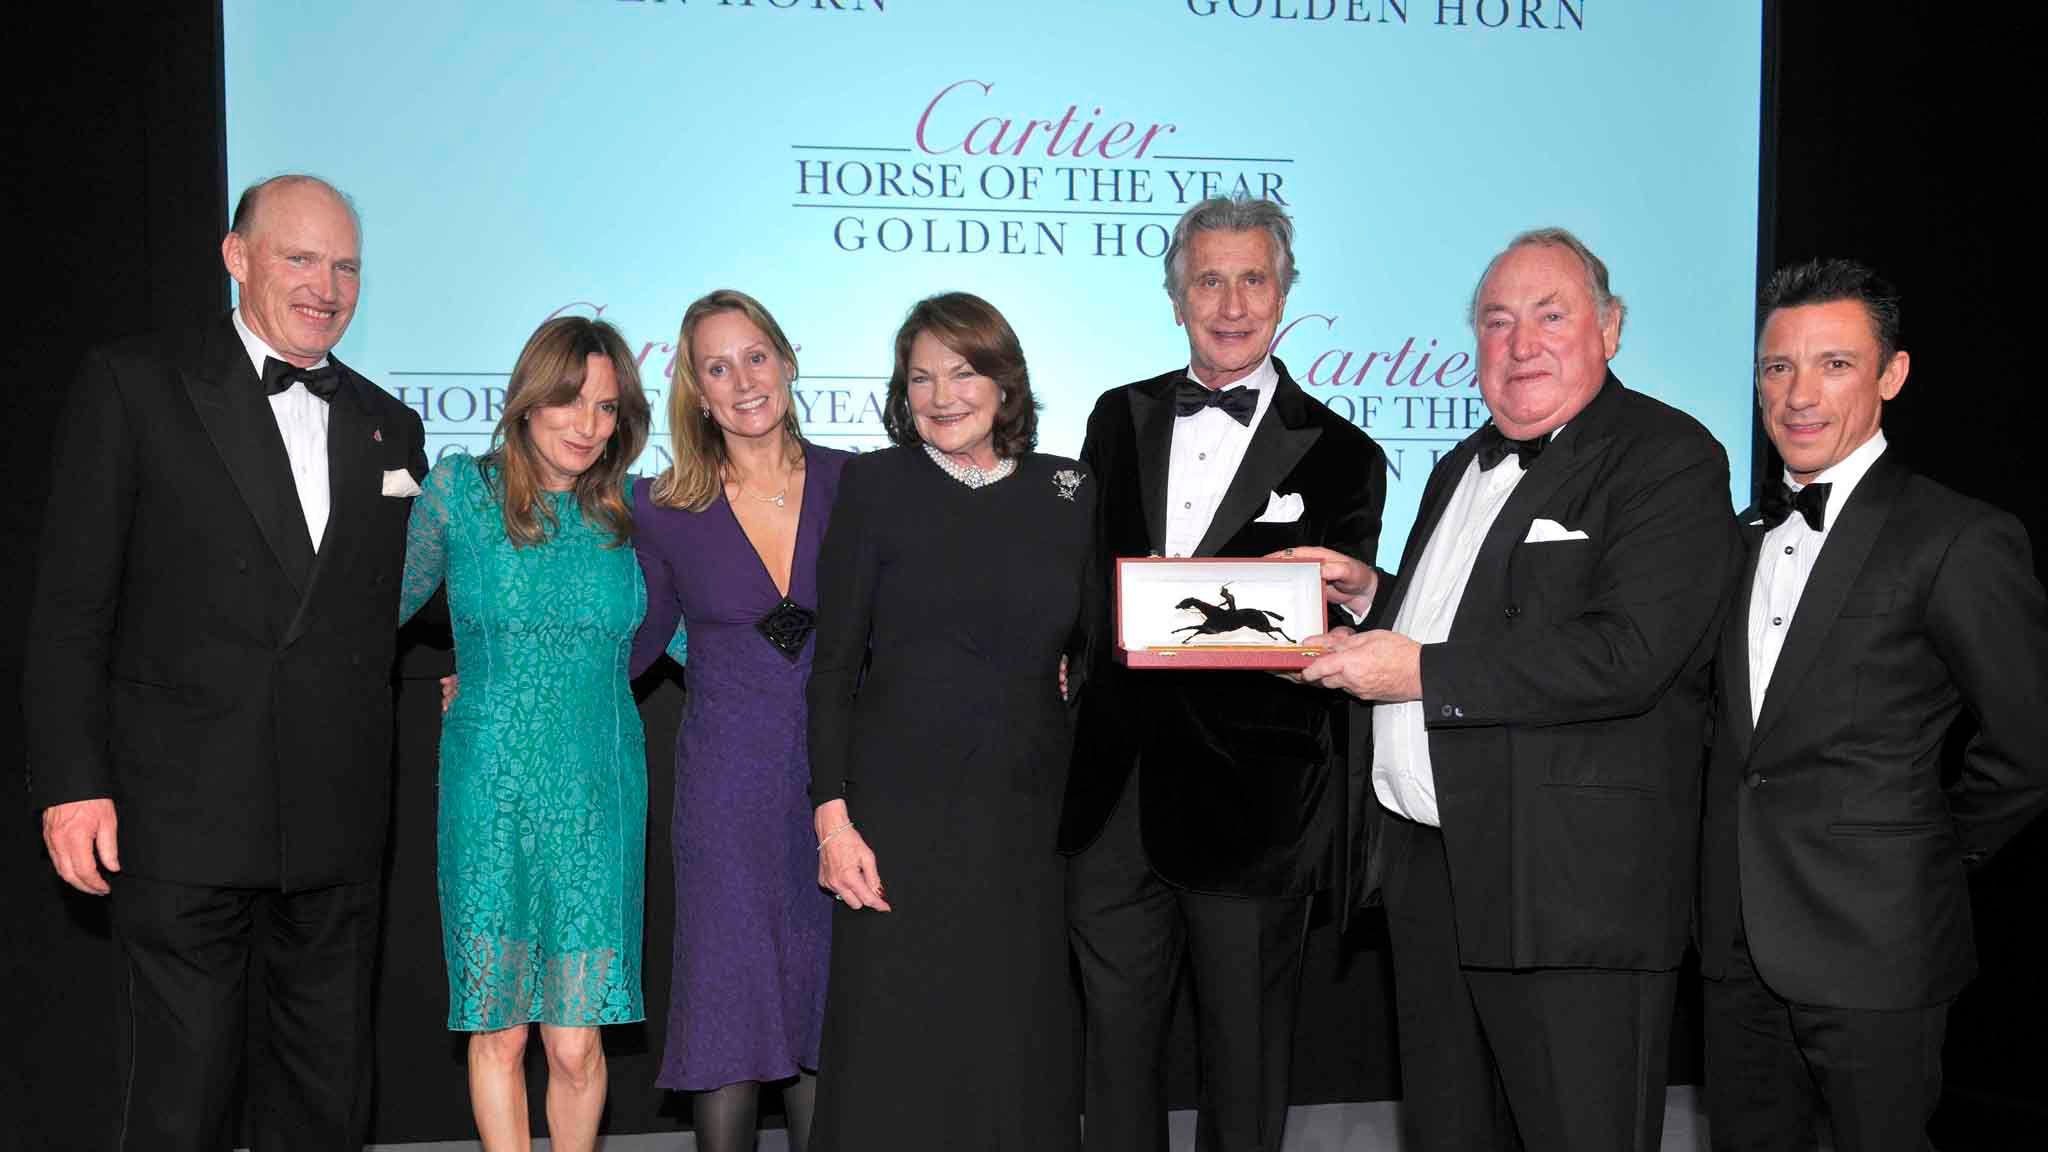 Golden Horn crowned Horse of the Year at Cartier awards Racing News